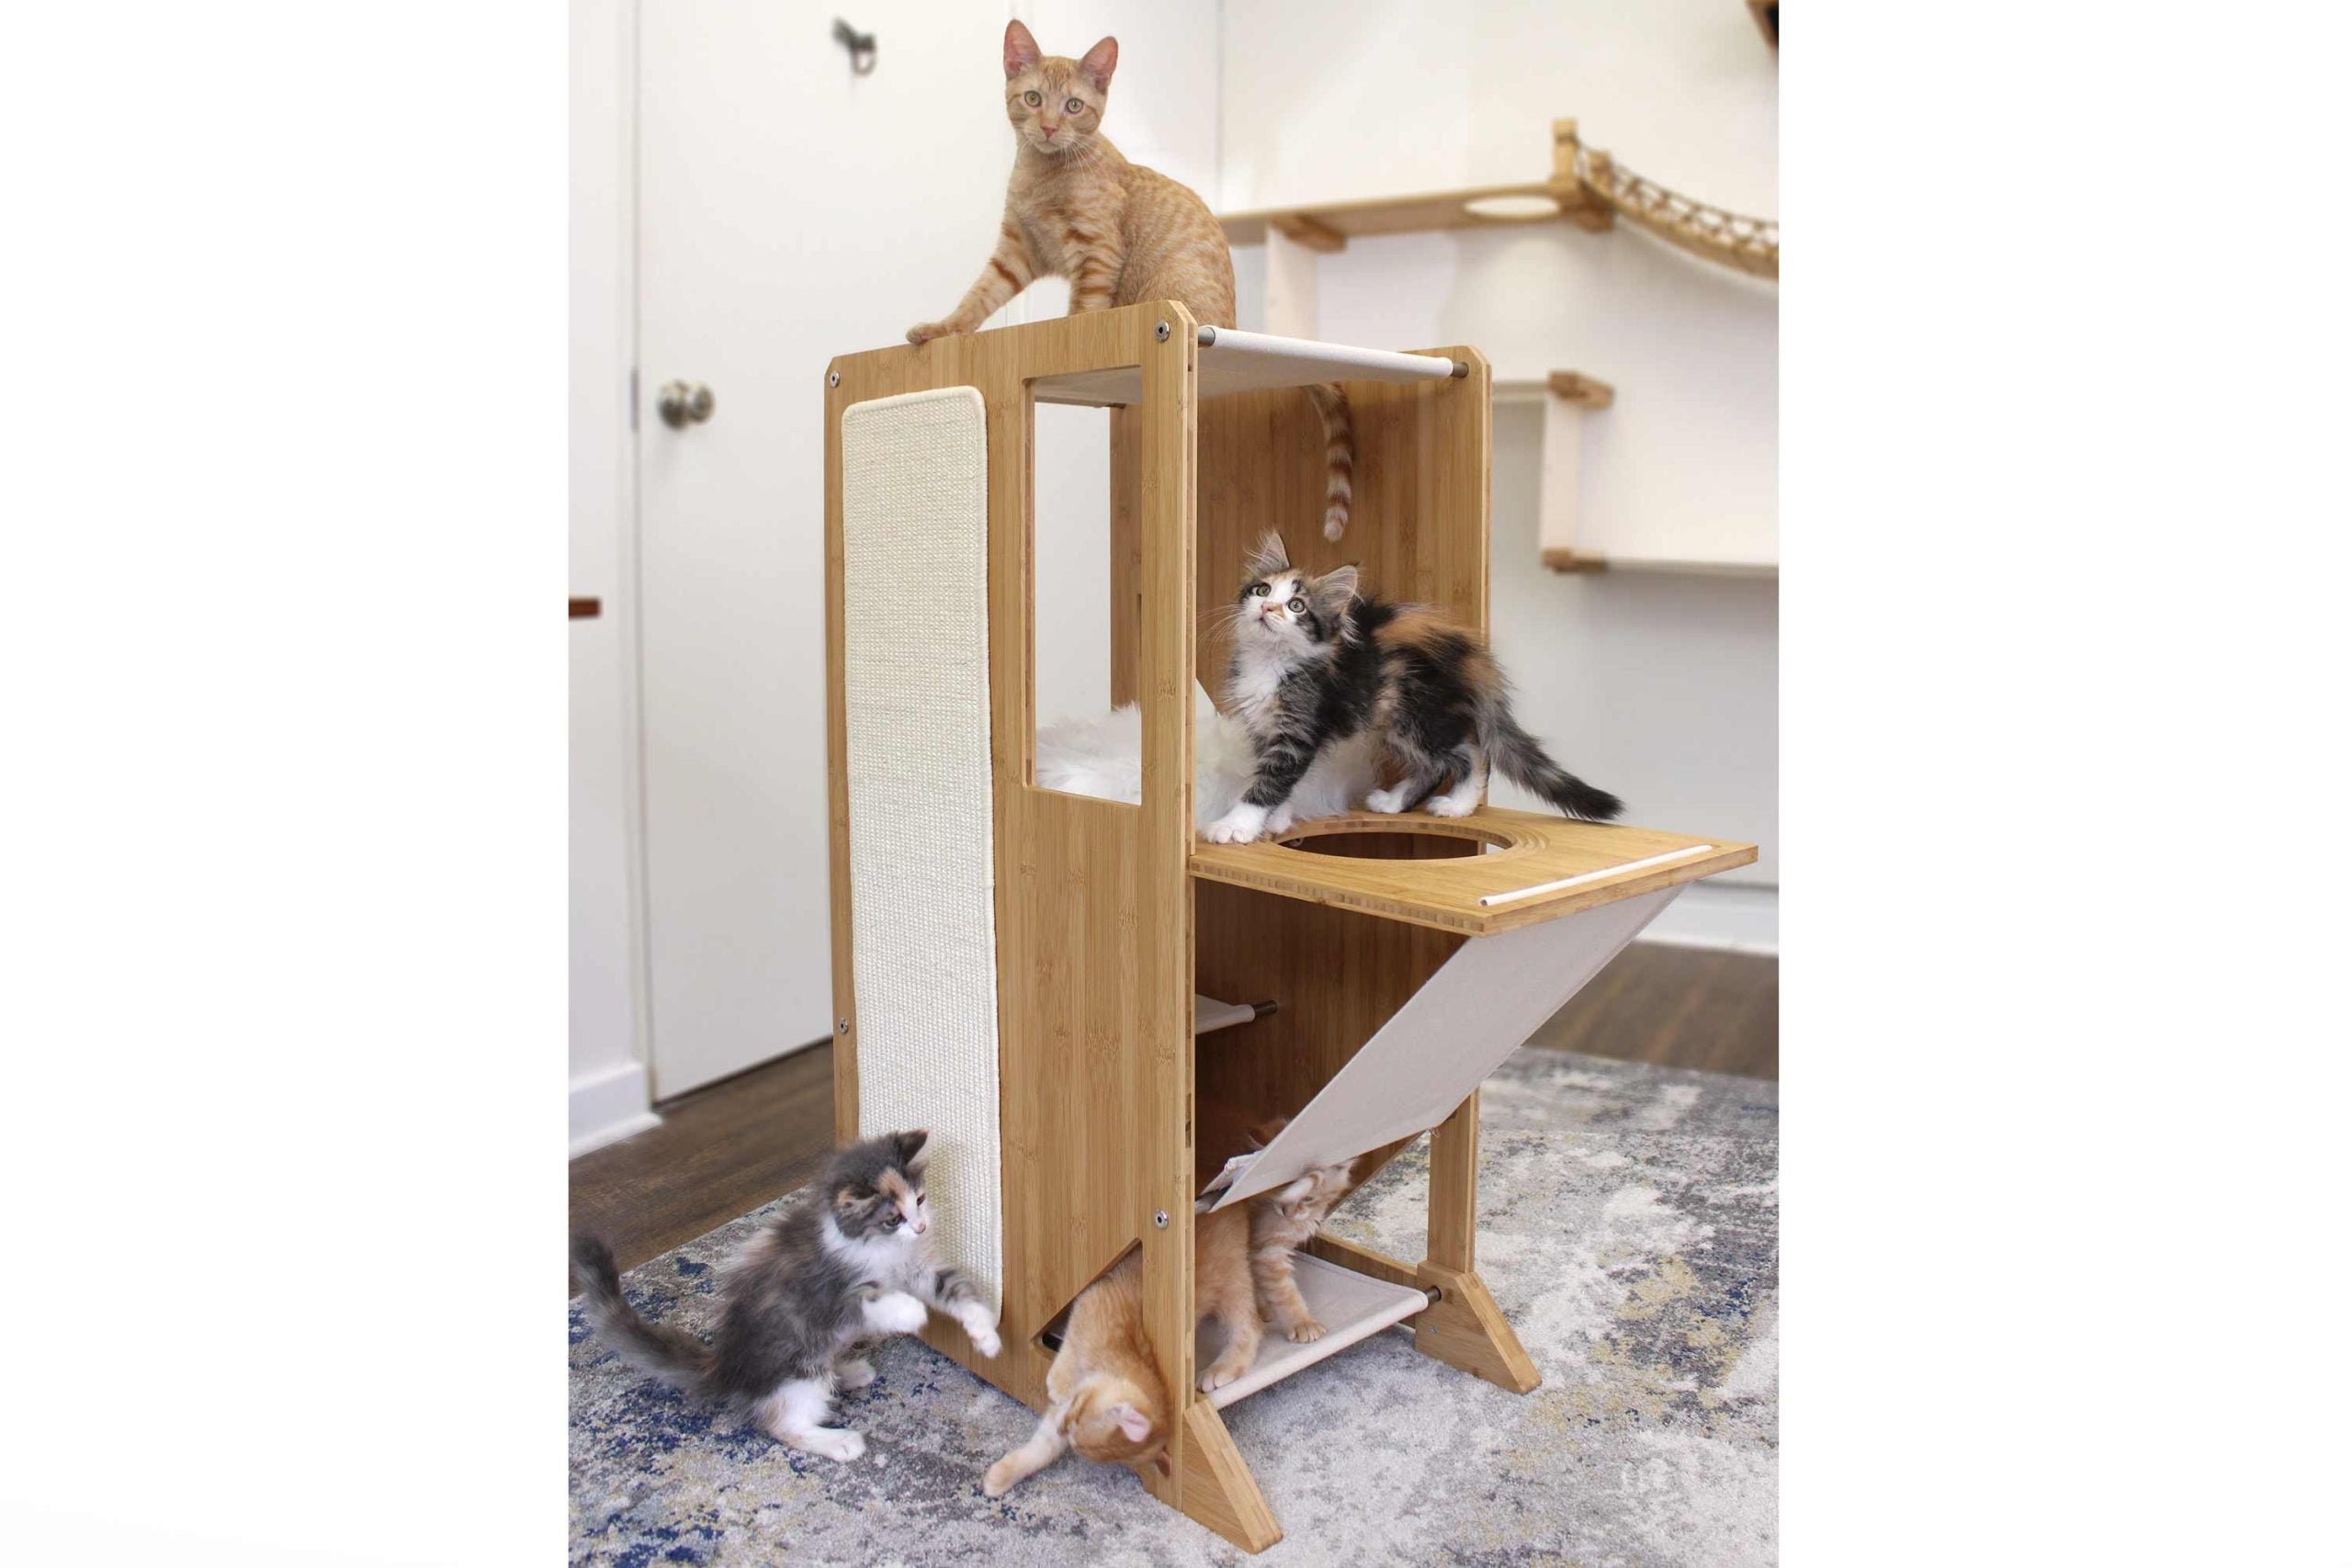 Kittens playing on Overlook Cat Tree With Large Window